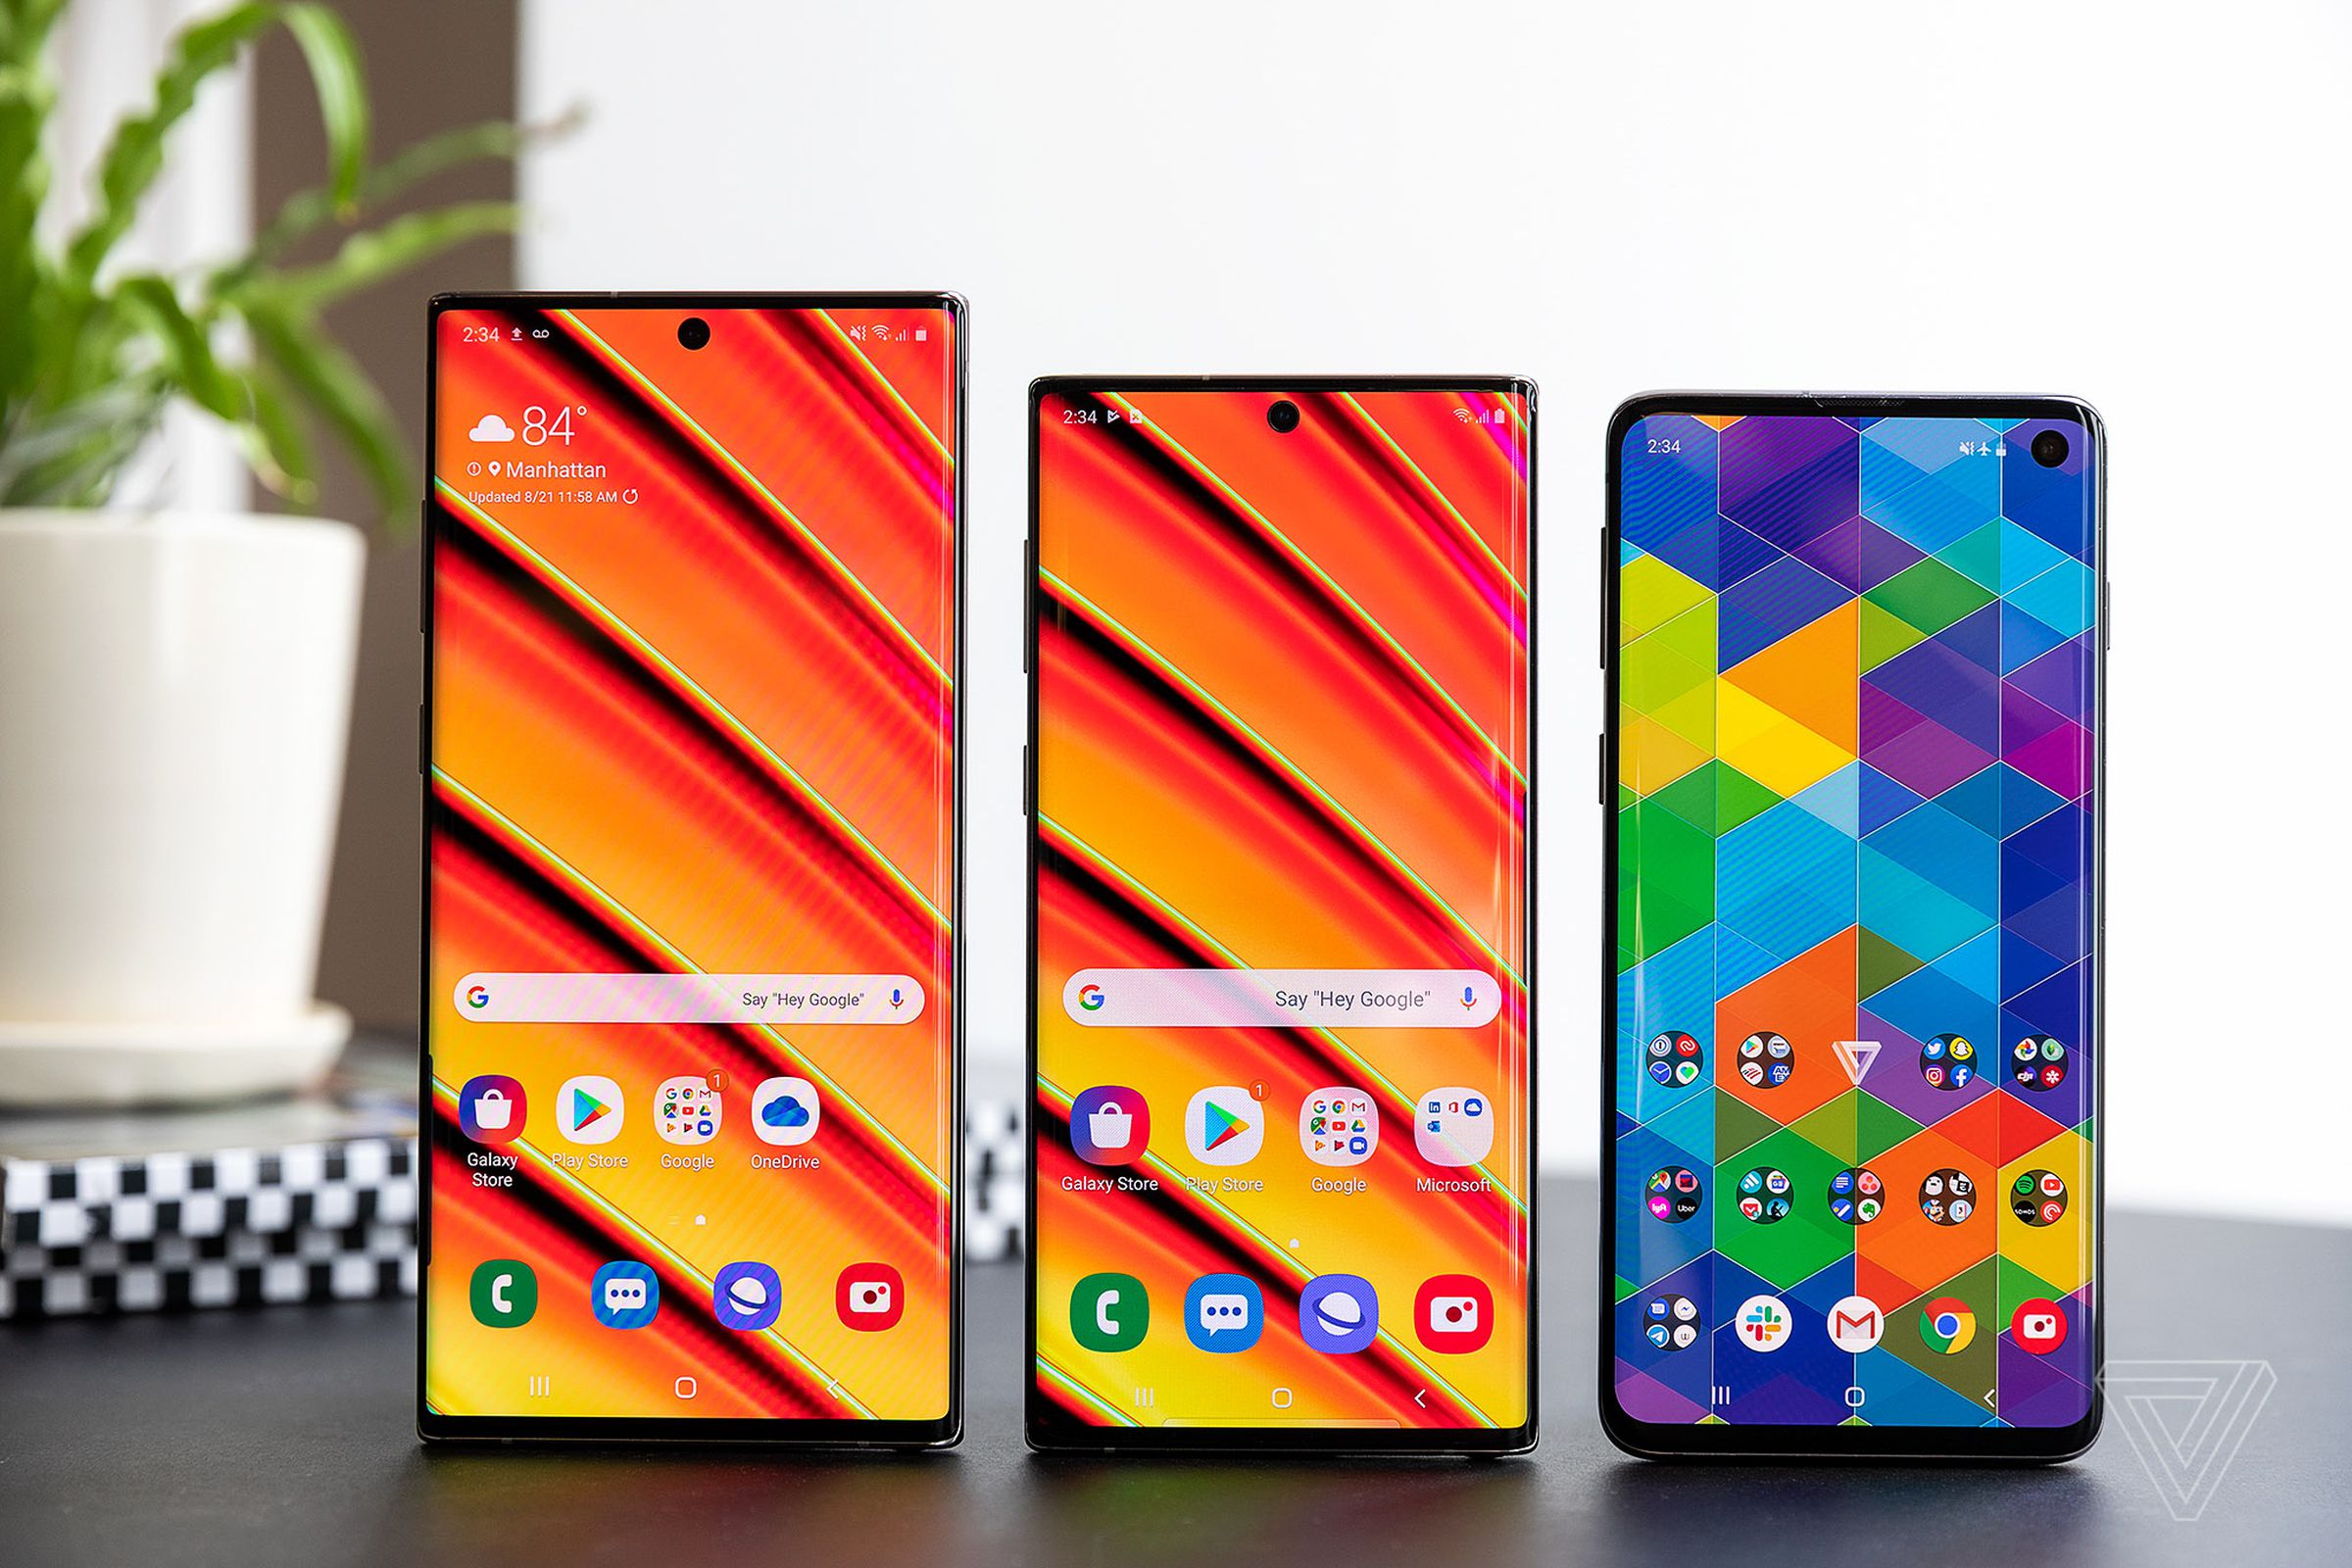 Left to right: Samsung Note 10 Plus, Note 10, Galaxy S10